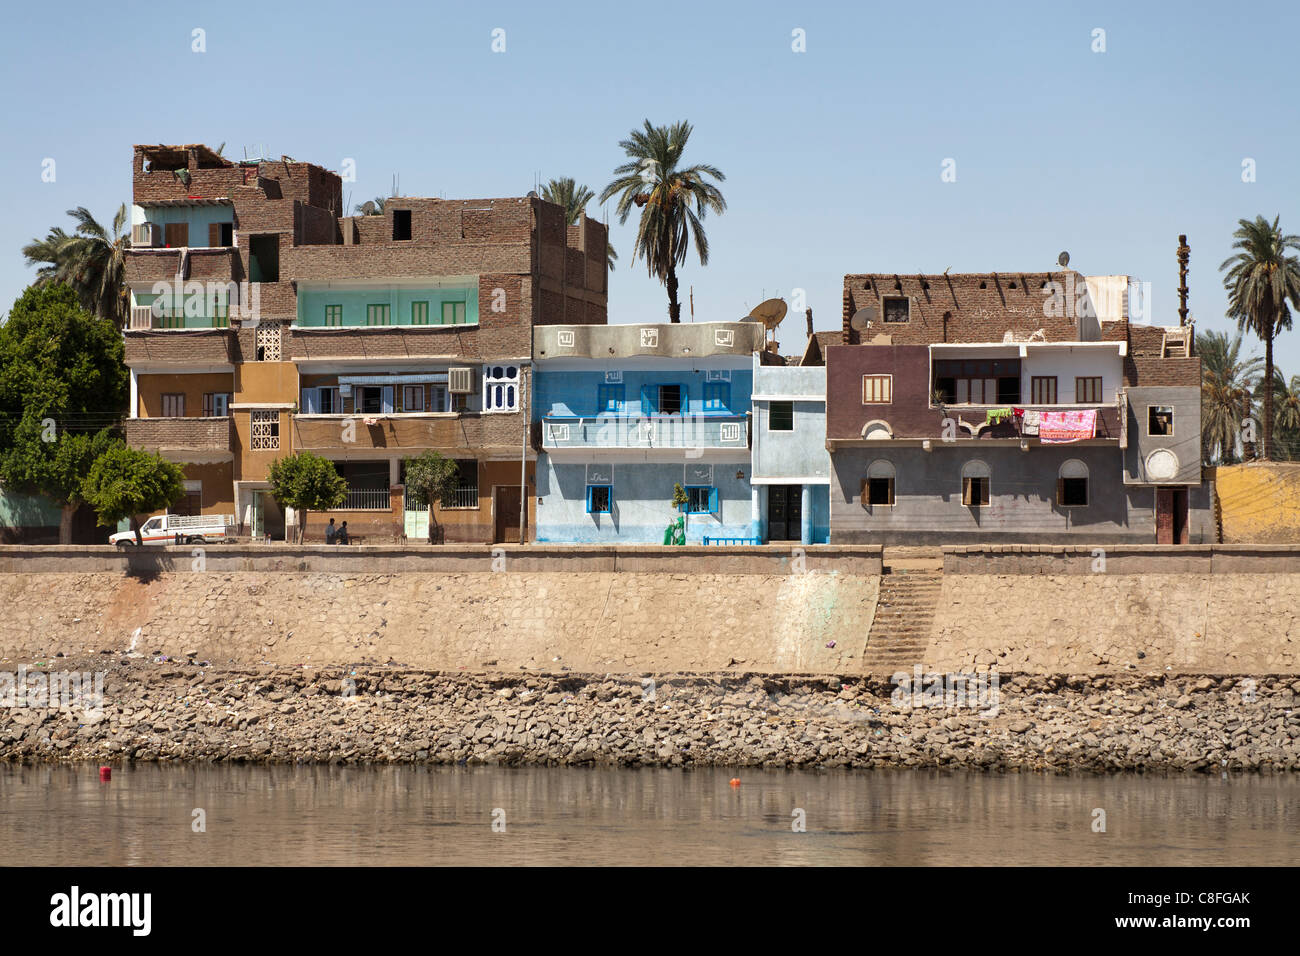 Traditional Egyptian houses with multi colour facades and washing hanging from balconies, overlooking the Nile river, Egypt Stock Photo